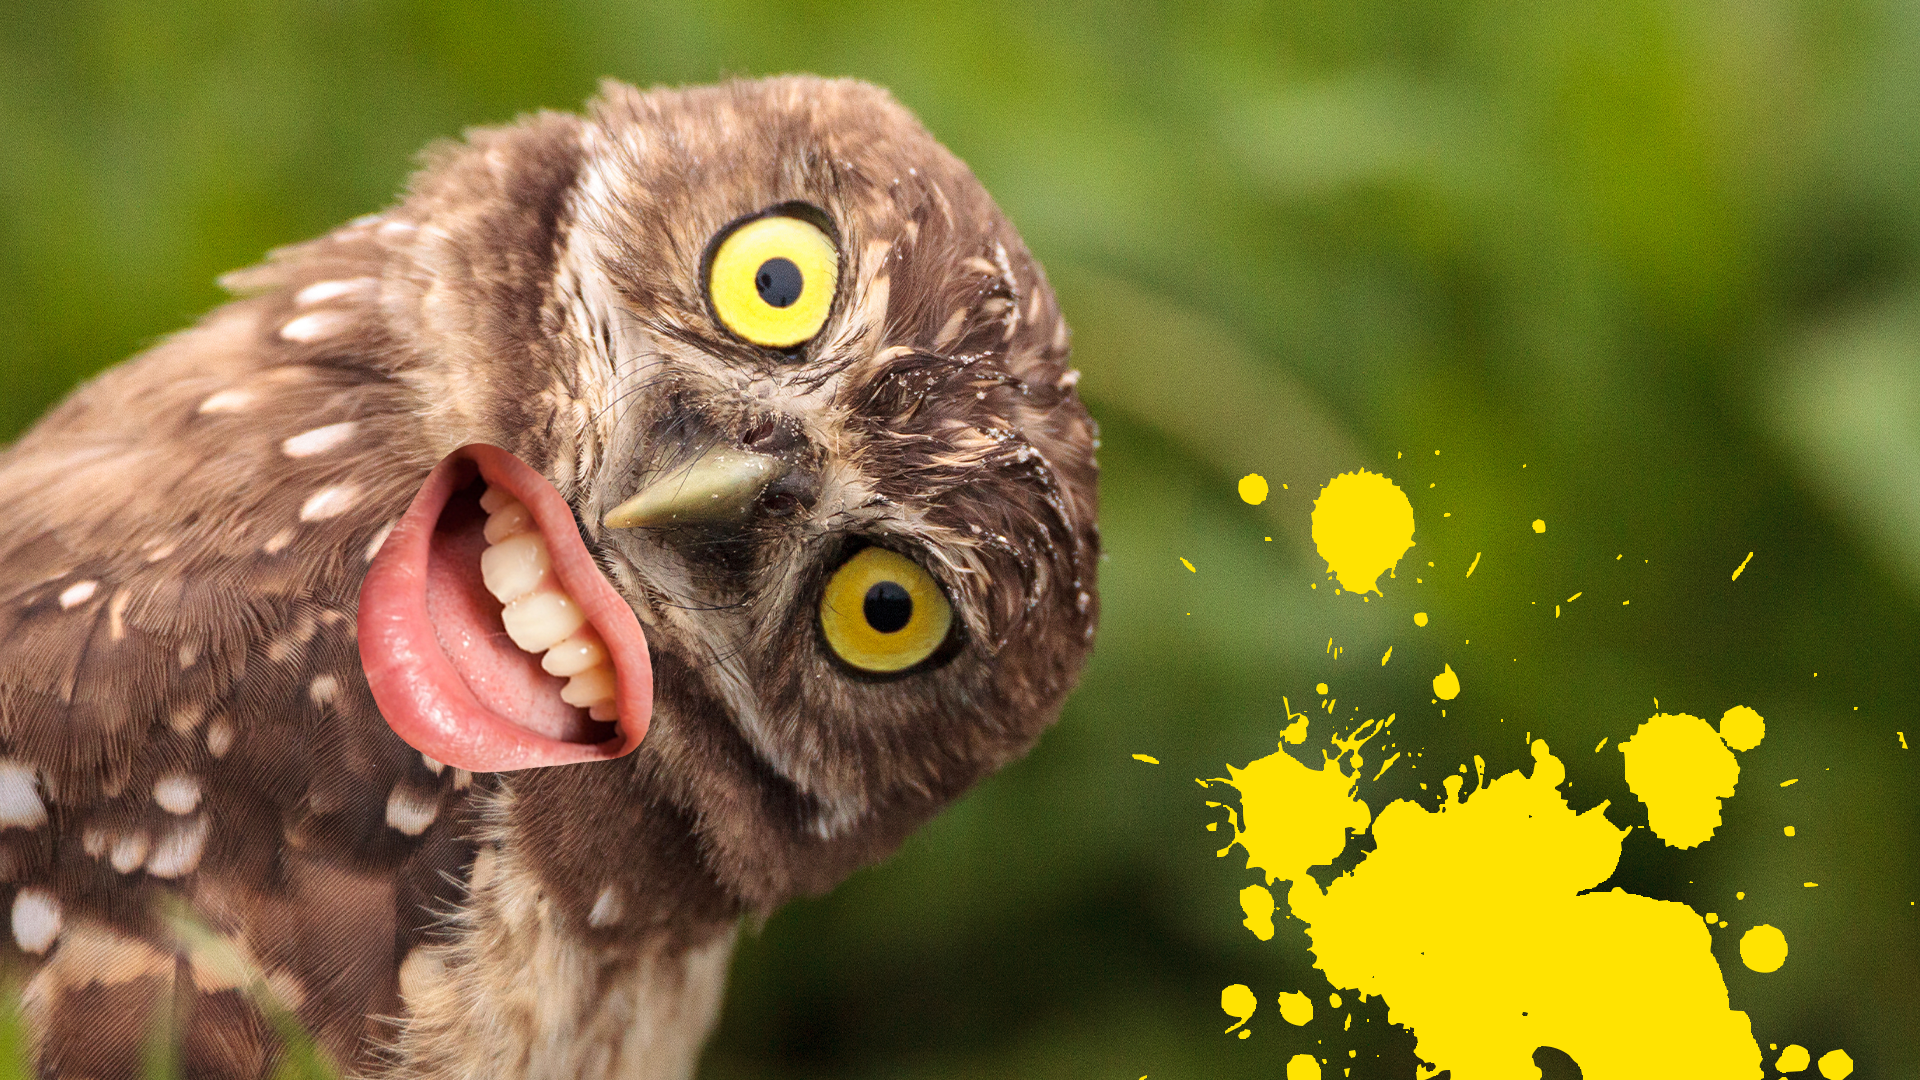 Owl with silly face and yellow splat